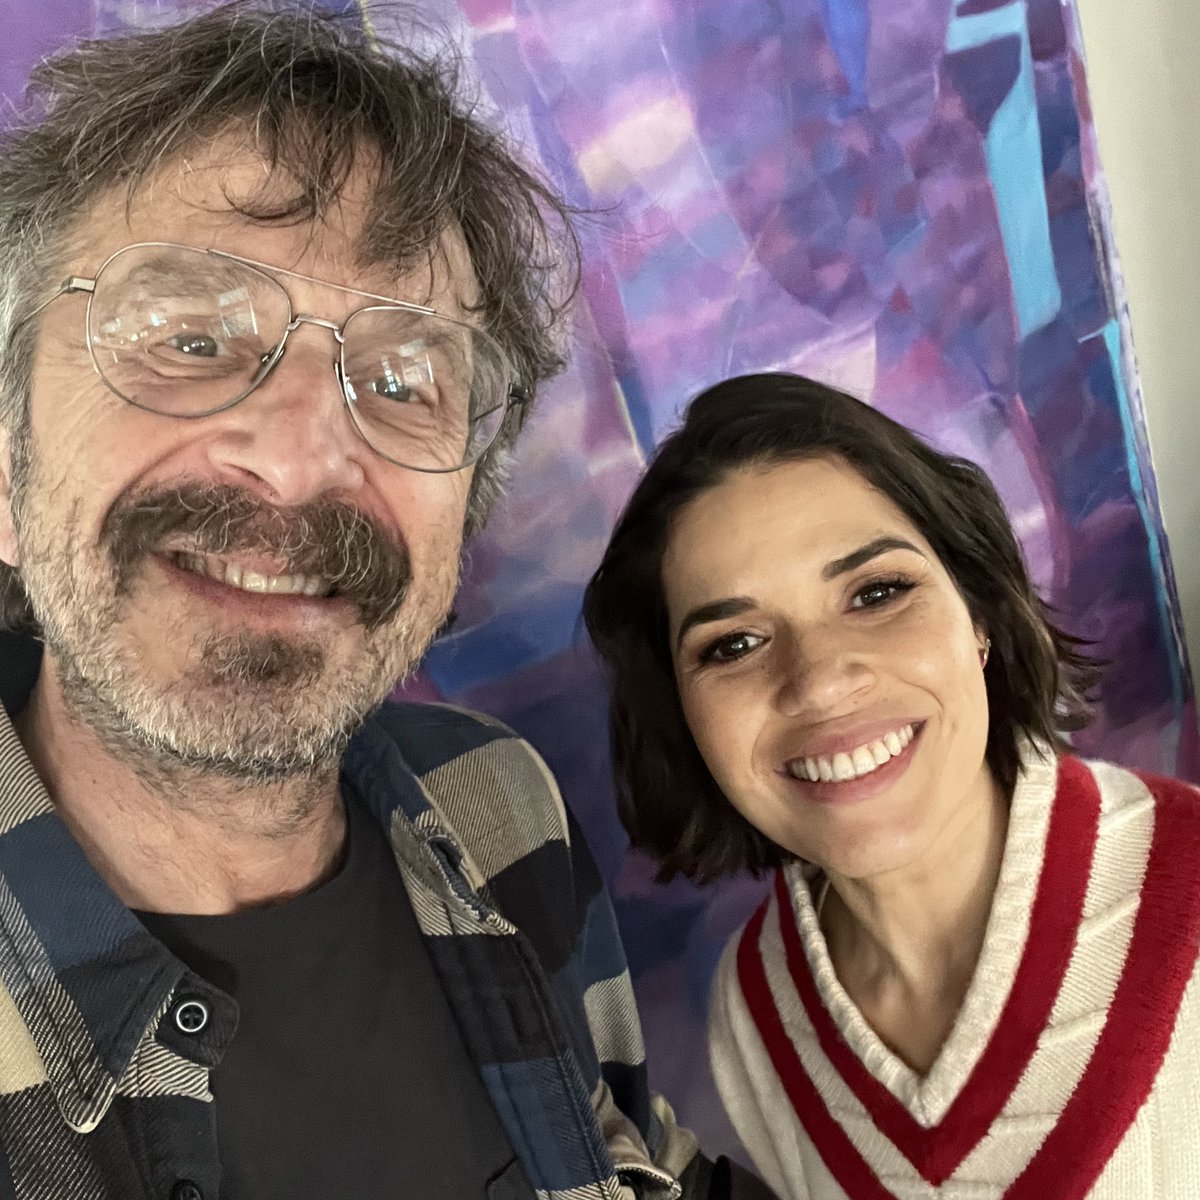 Today is @AmericaFerrera day on wtfpod.com! Cultural identities, Ugly Betty, combatting typecasting, that Barbie monologue! Good talk! Listen up! Episode hosted by @acast - wtfpod.com/podcast/episod… On @ApplePodcasts - podcasts.apple.com/us/podcast/epi…